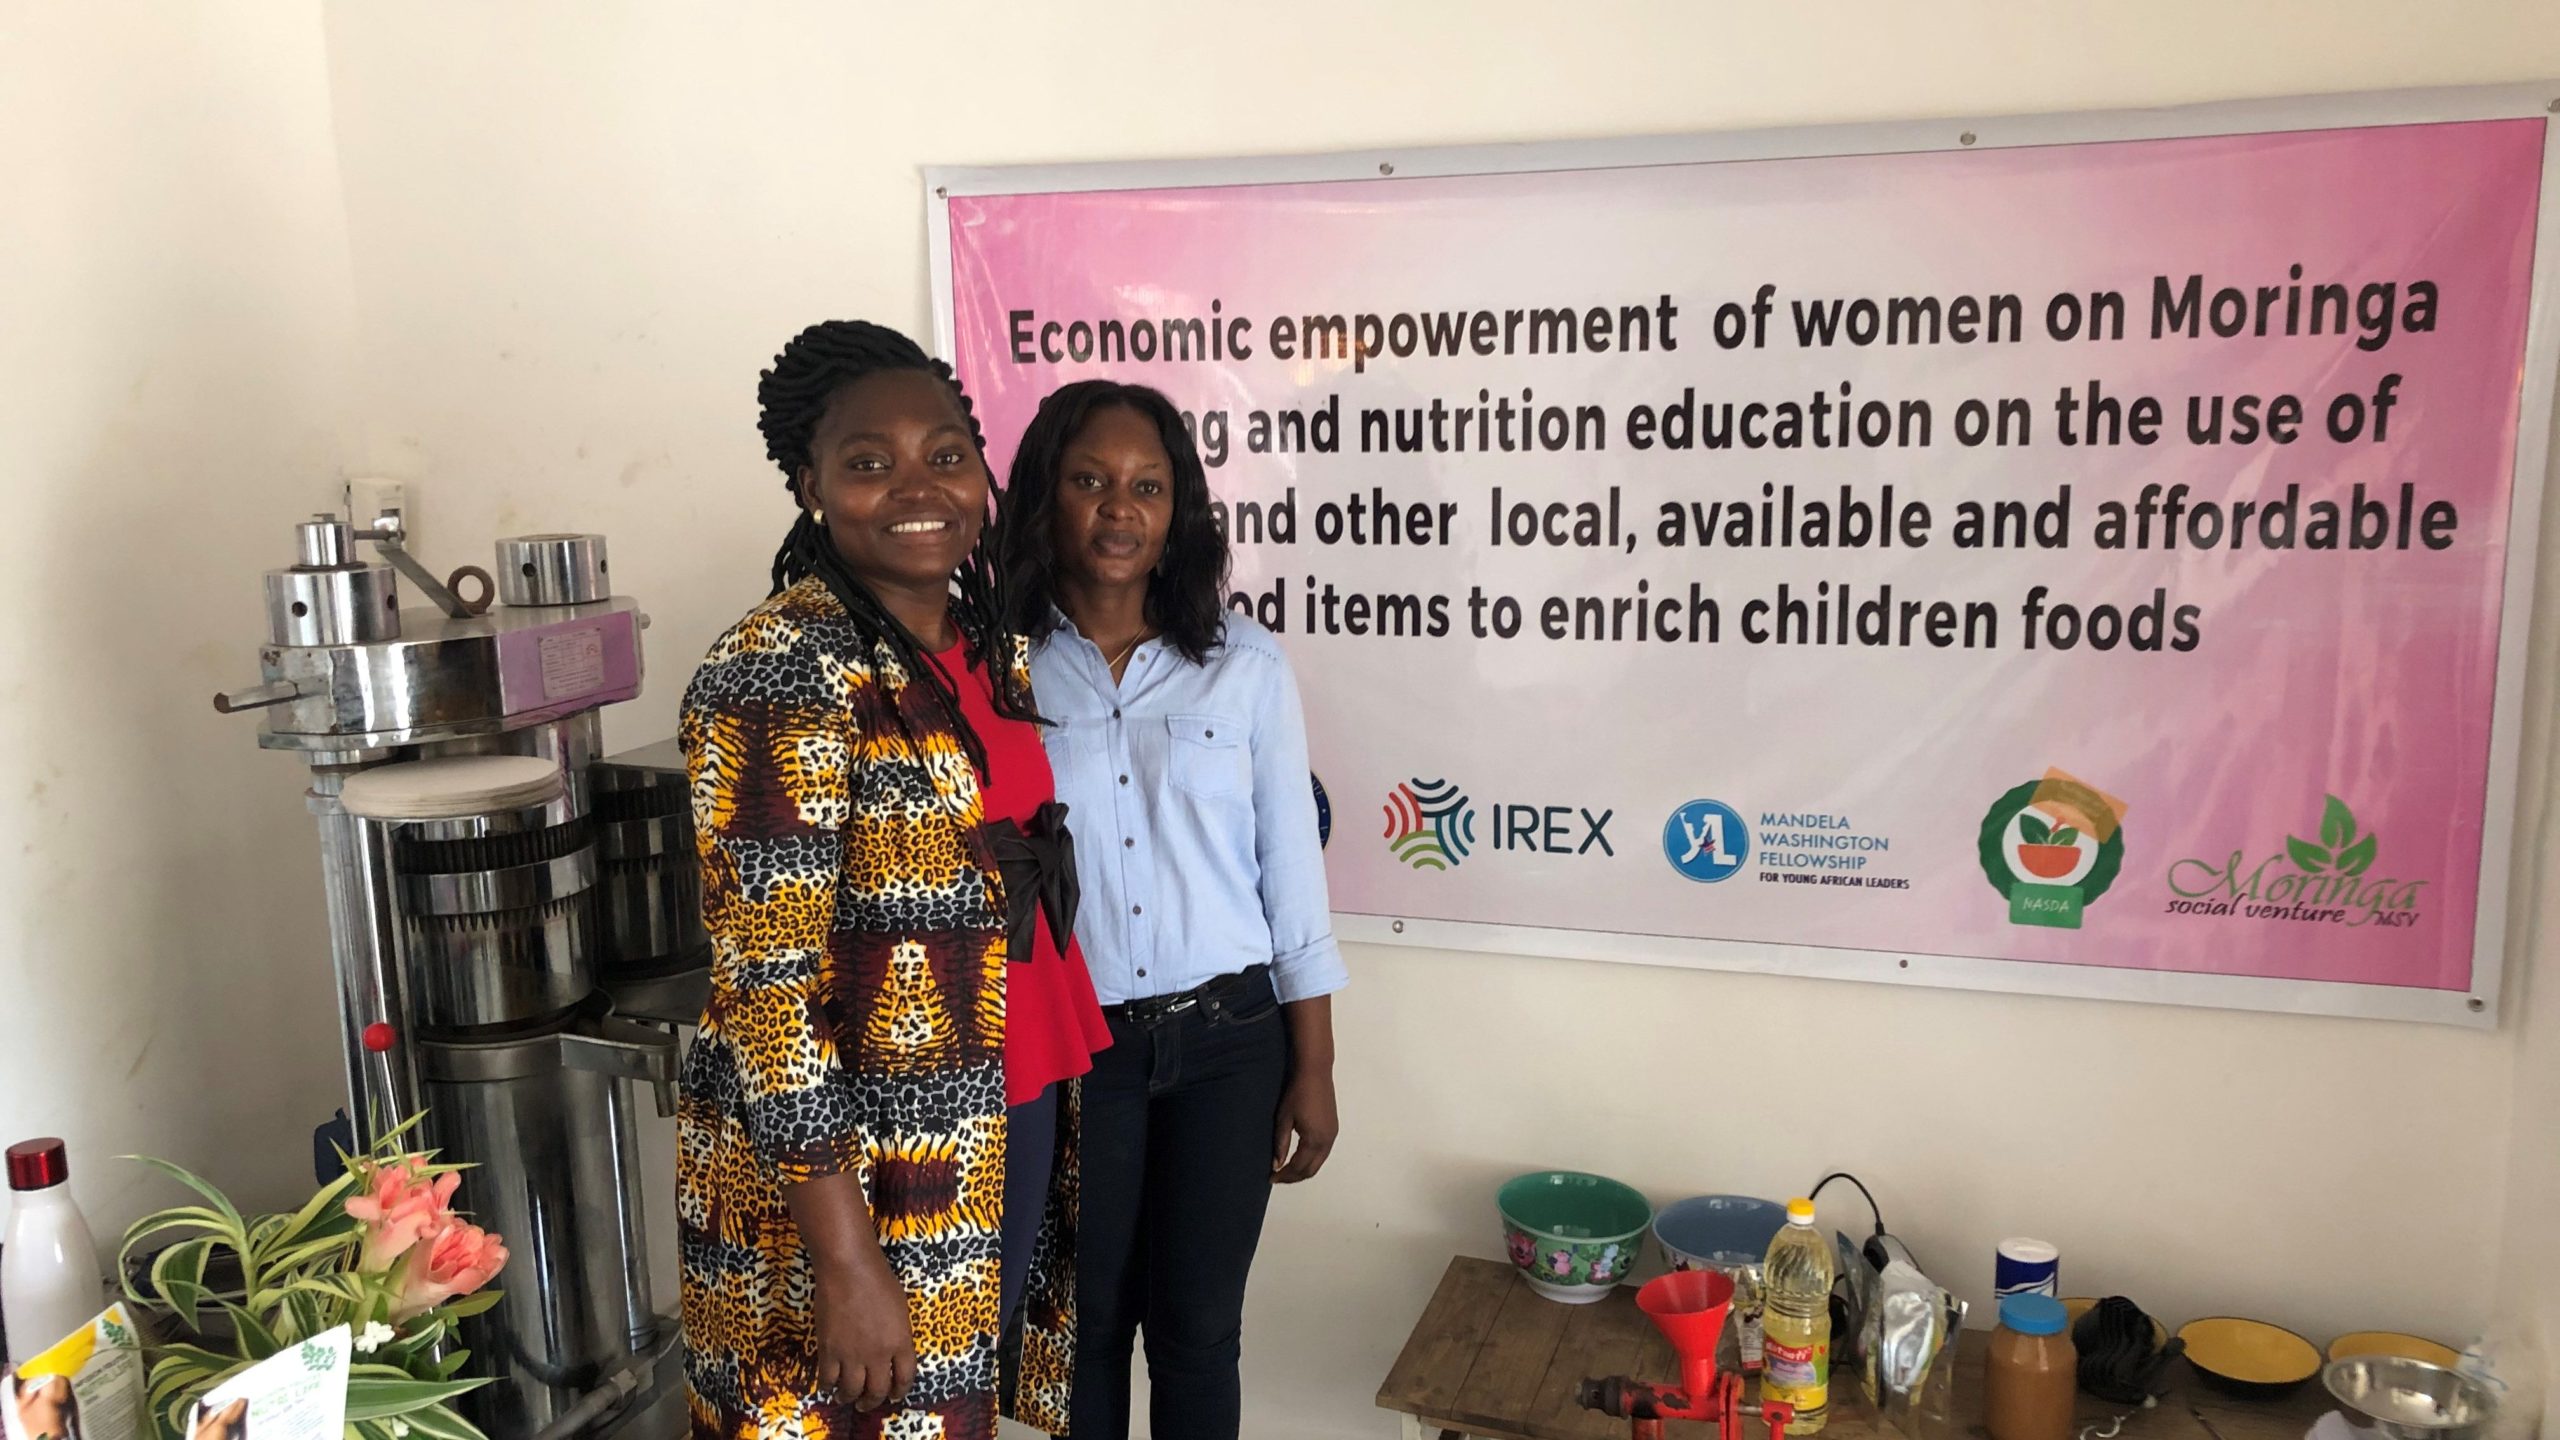 2 women stand in front of a poster on a wall, which says "Economic empowerment of women on moringa farming and nutrition education on the use of moringa and other local, available and affordable food items to enrich children foods."